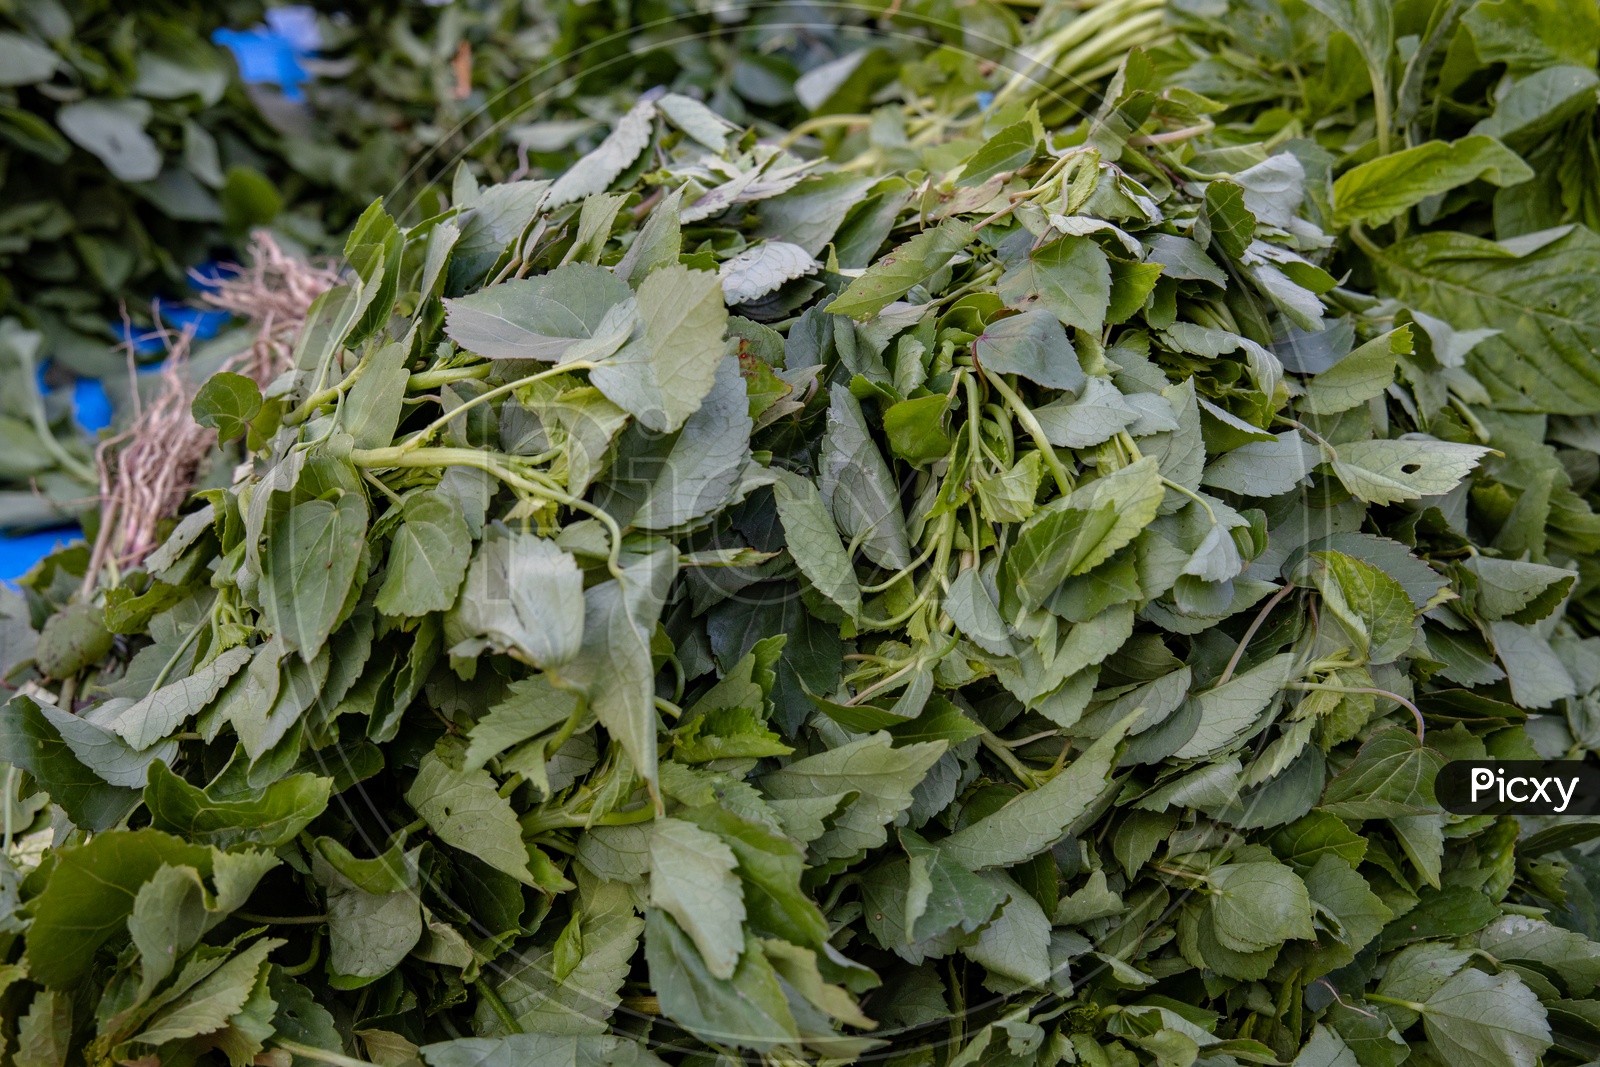 Green Leafy  vegetables  in  a Vendor Stall